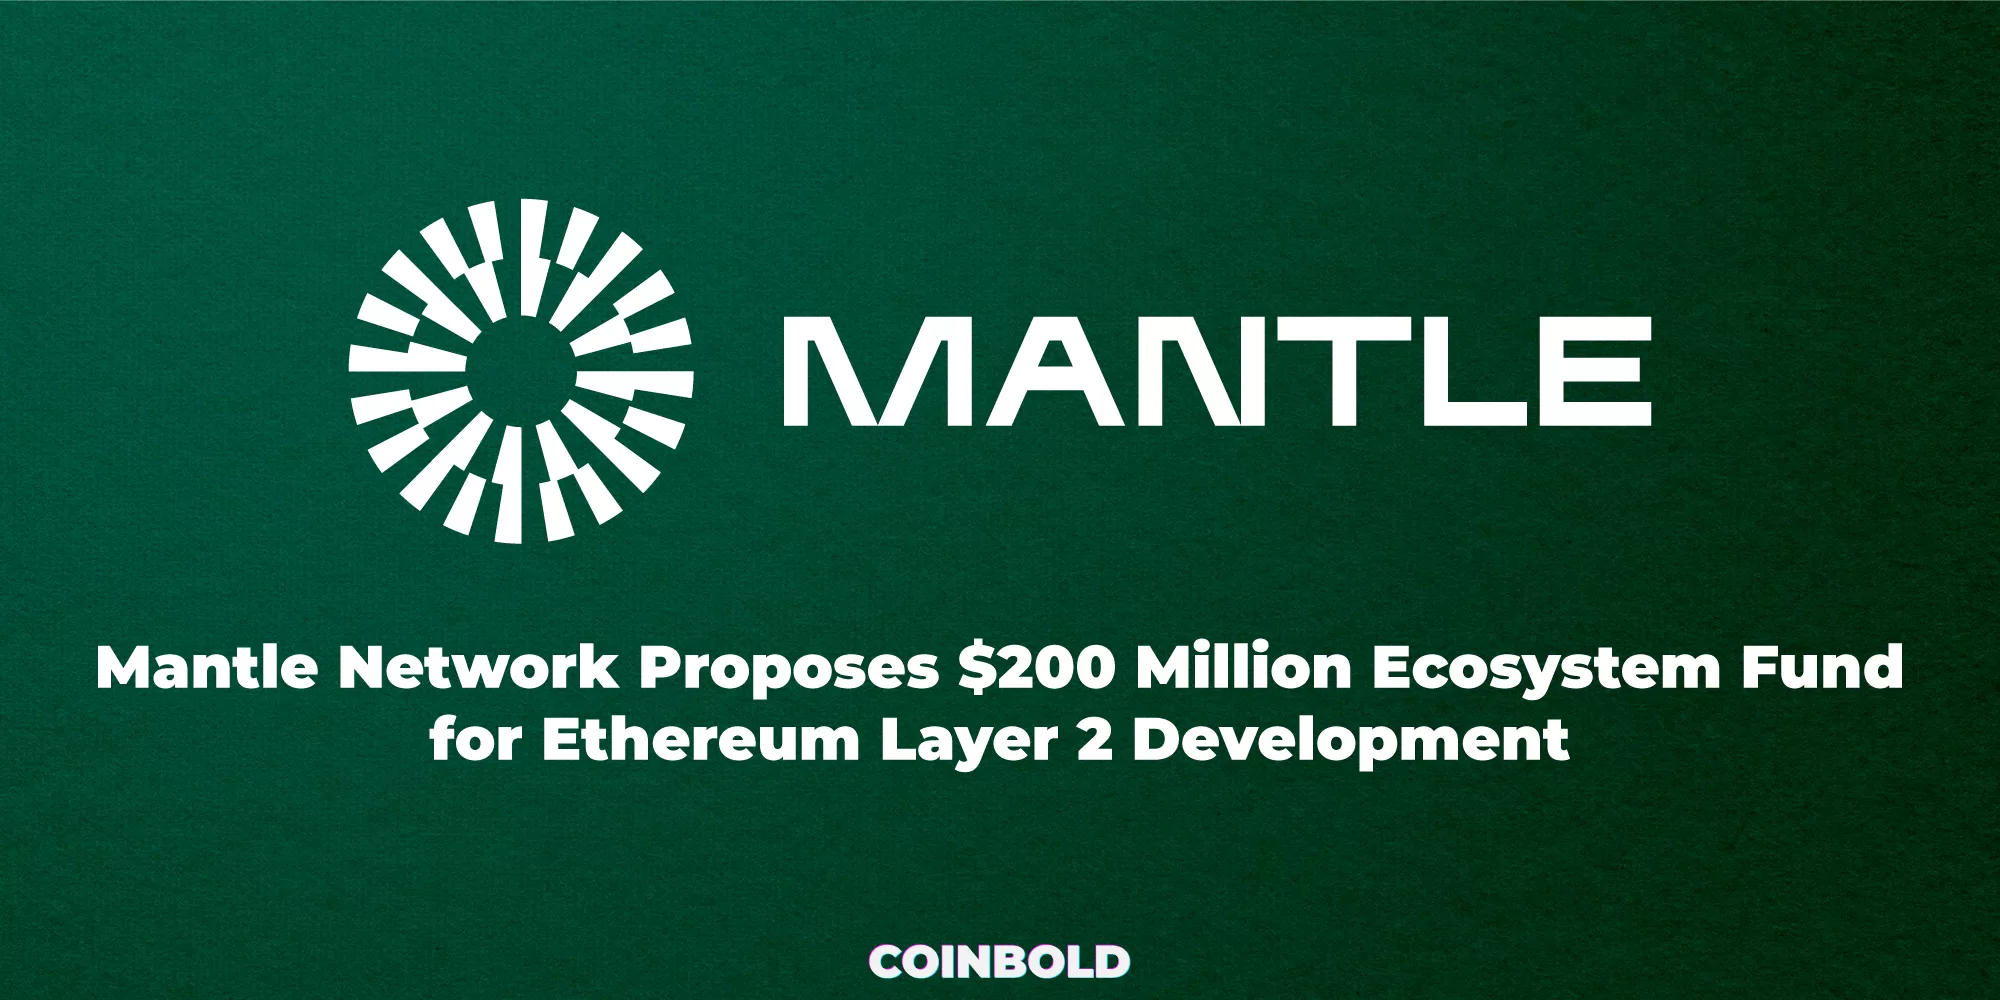 Mantle Network Proposes $200 Million Ecosystem Fund for Ethereum Layer 2 Development